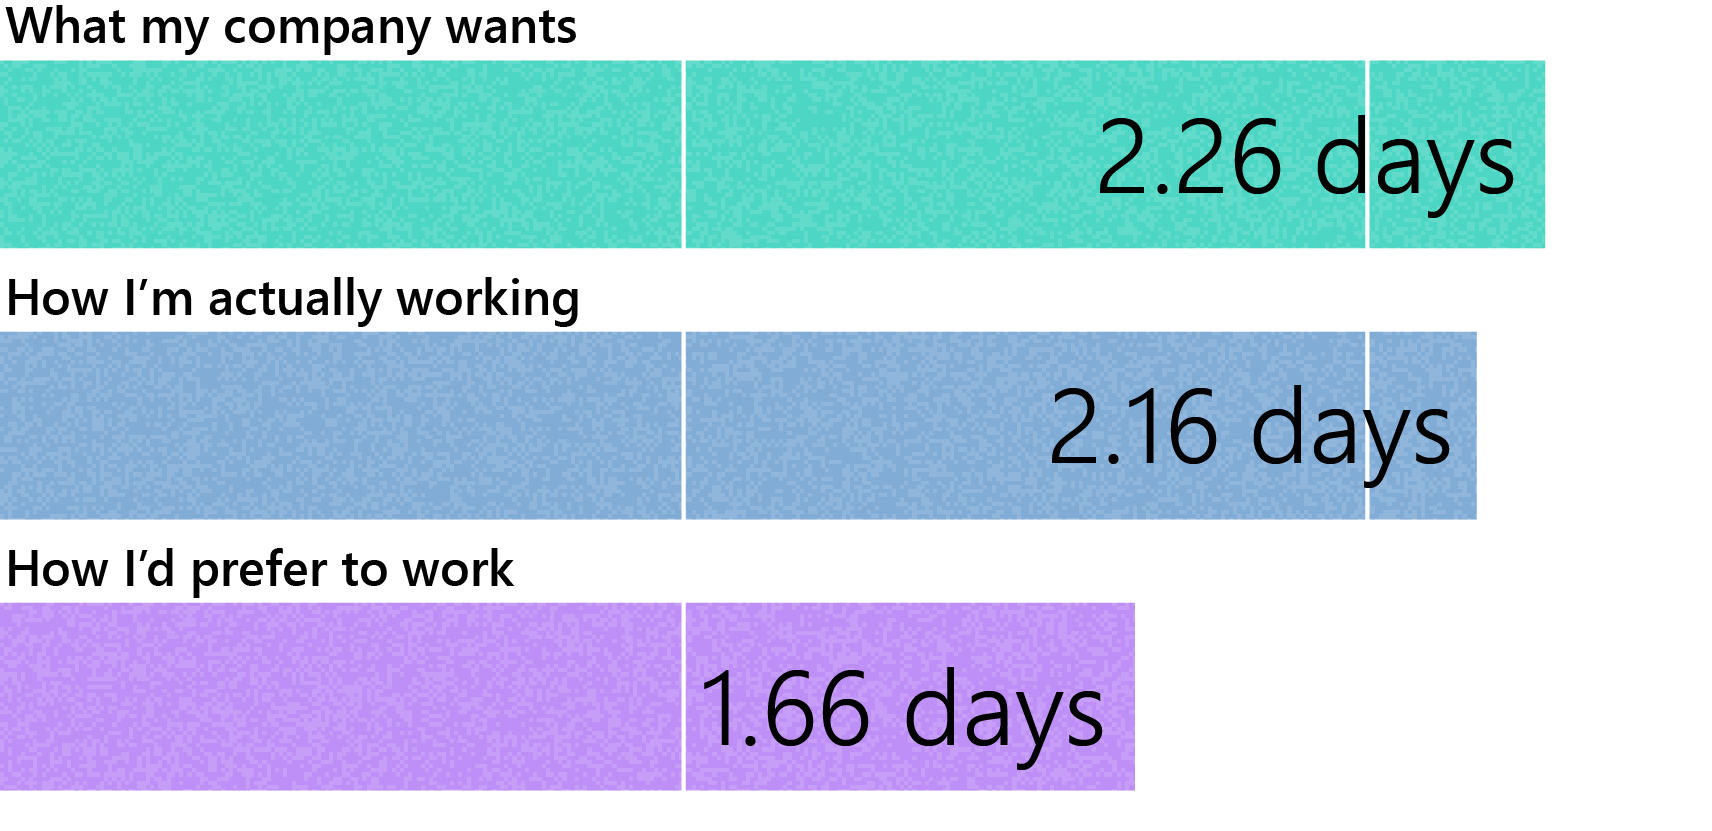 Horizontal bar chart that showcases the distribution of how many days a week employees prefer to work based on their preferences, the company's preferences, and actual behavior.